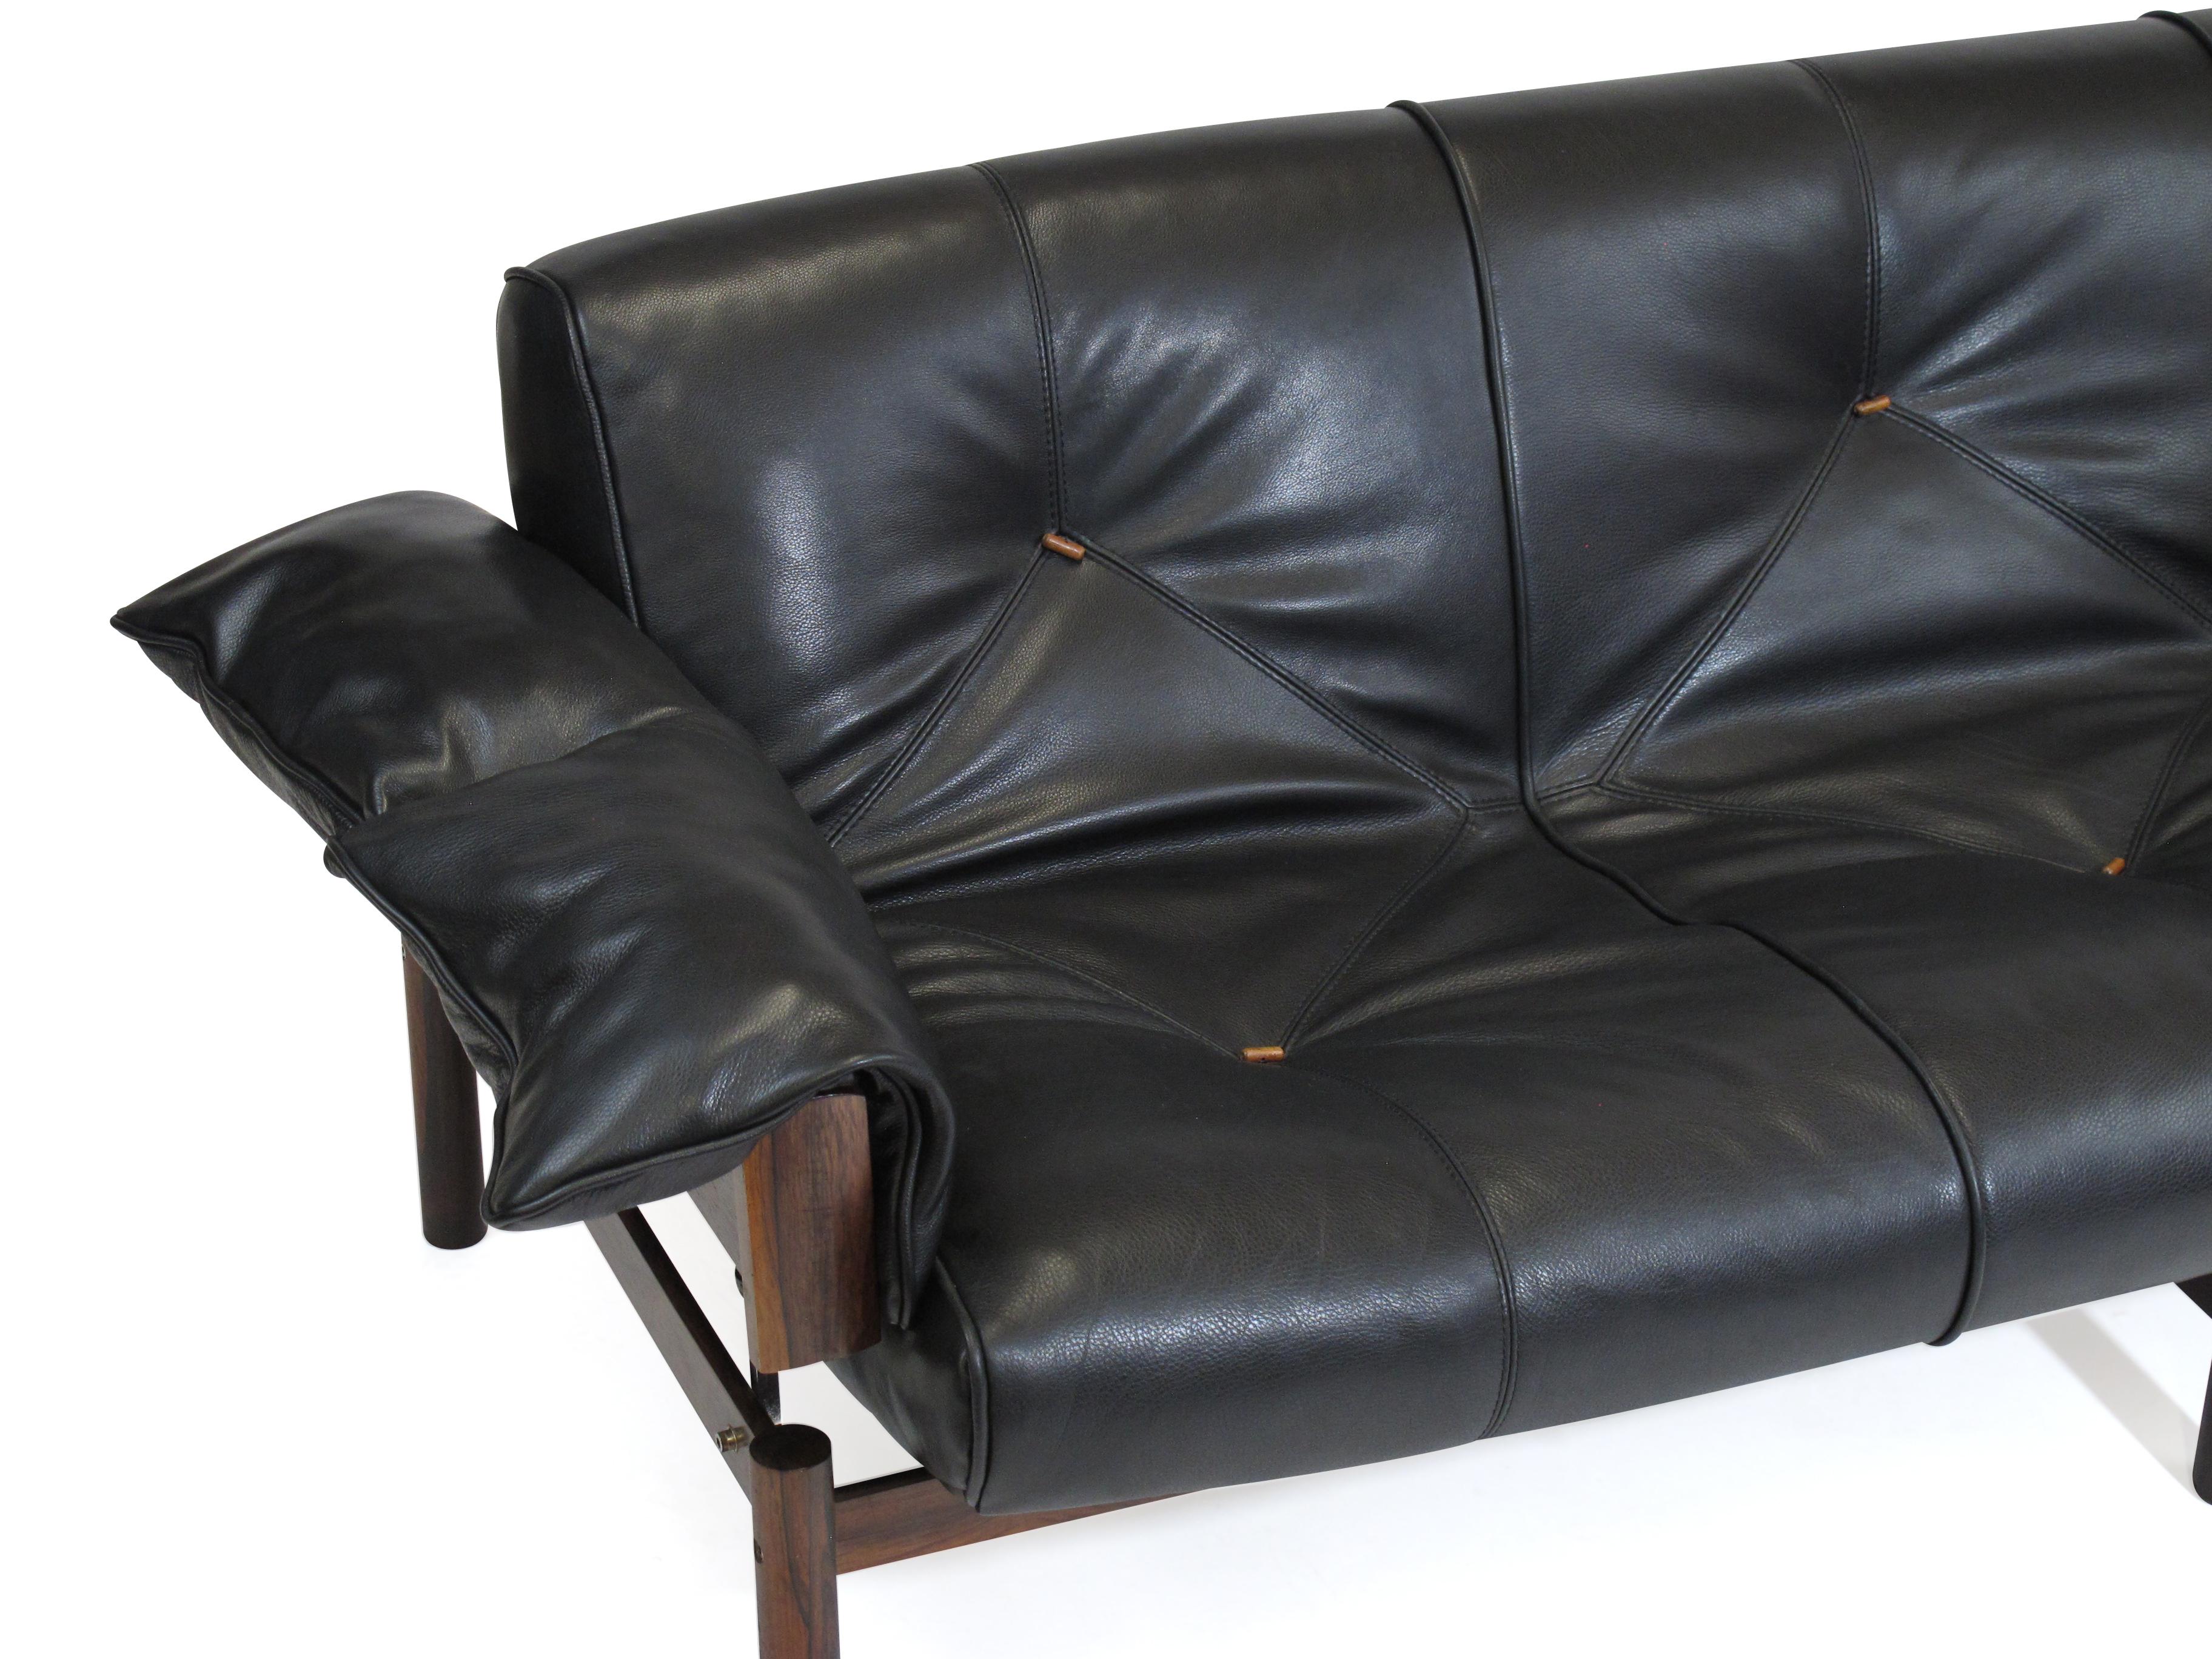 1960 Percival Lafer Brazilian Rosewood Sofa and Chair in Black Leather 11